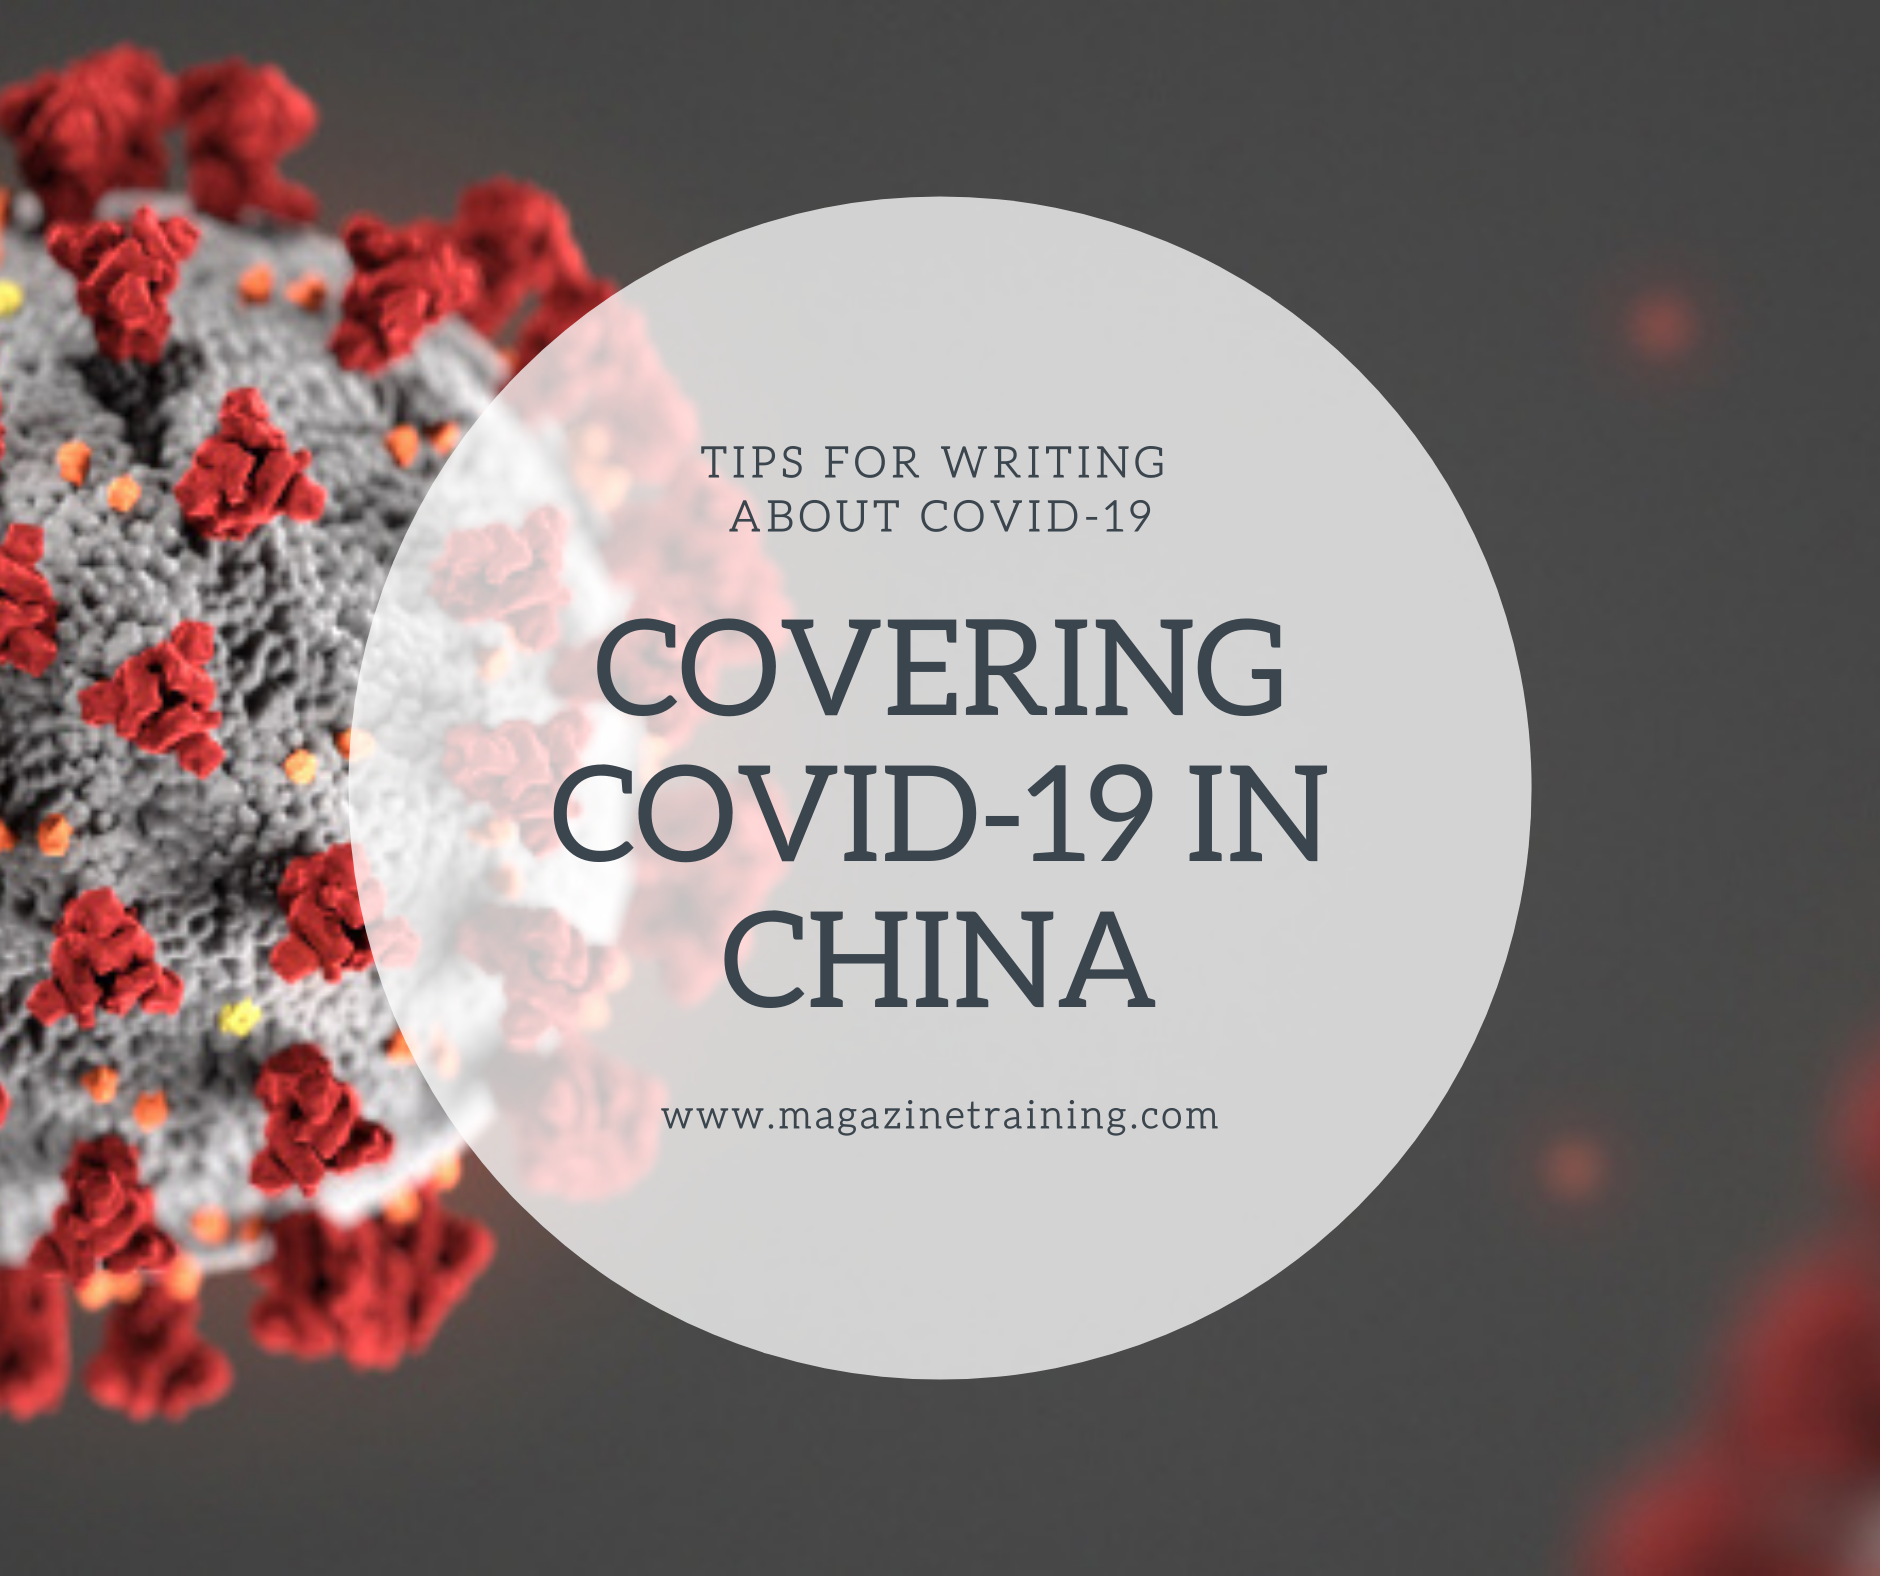 COVID-19 in China